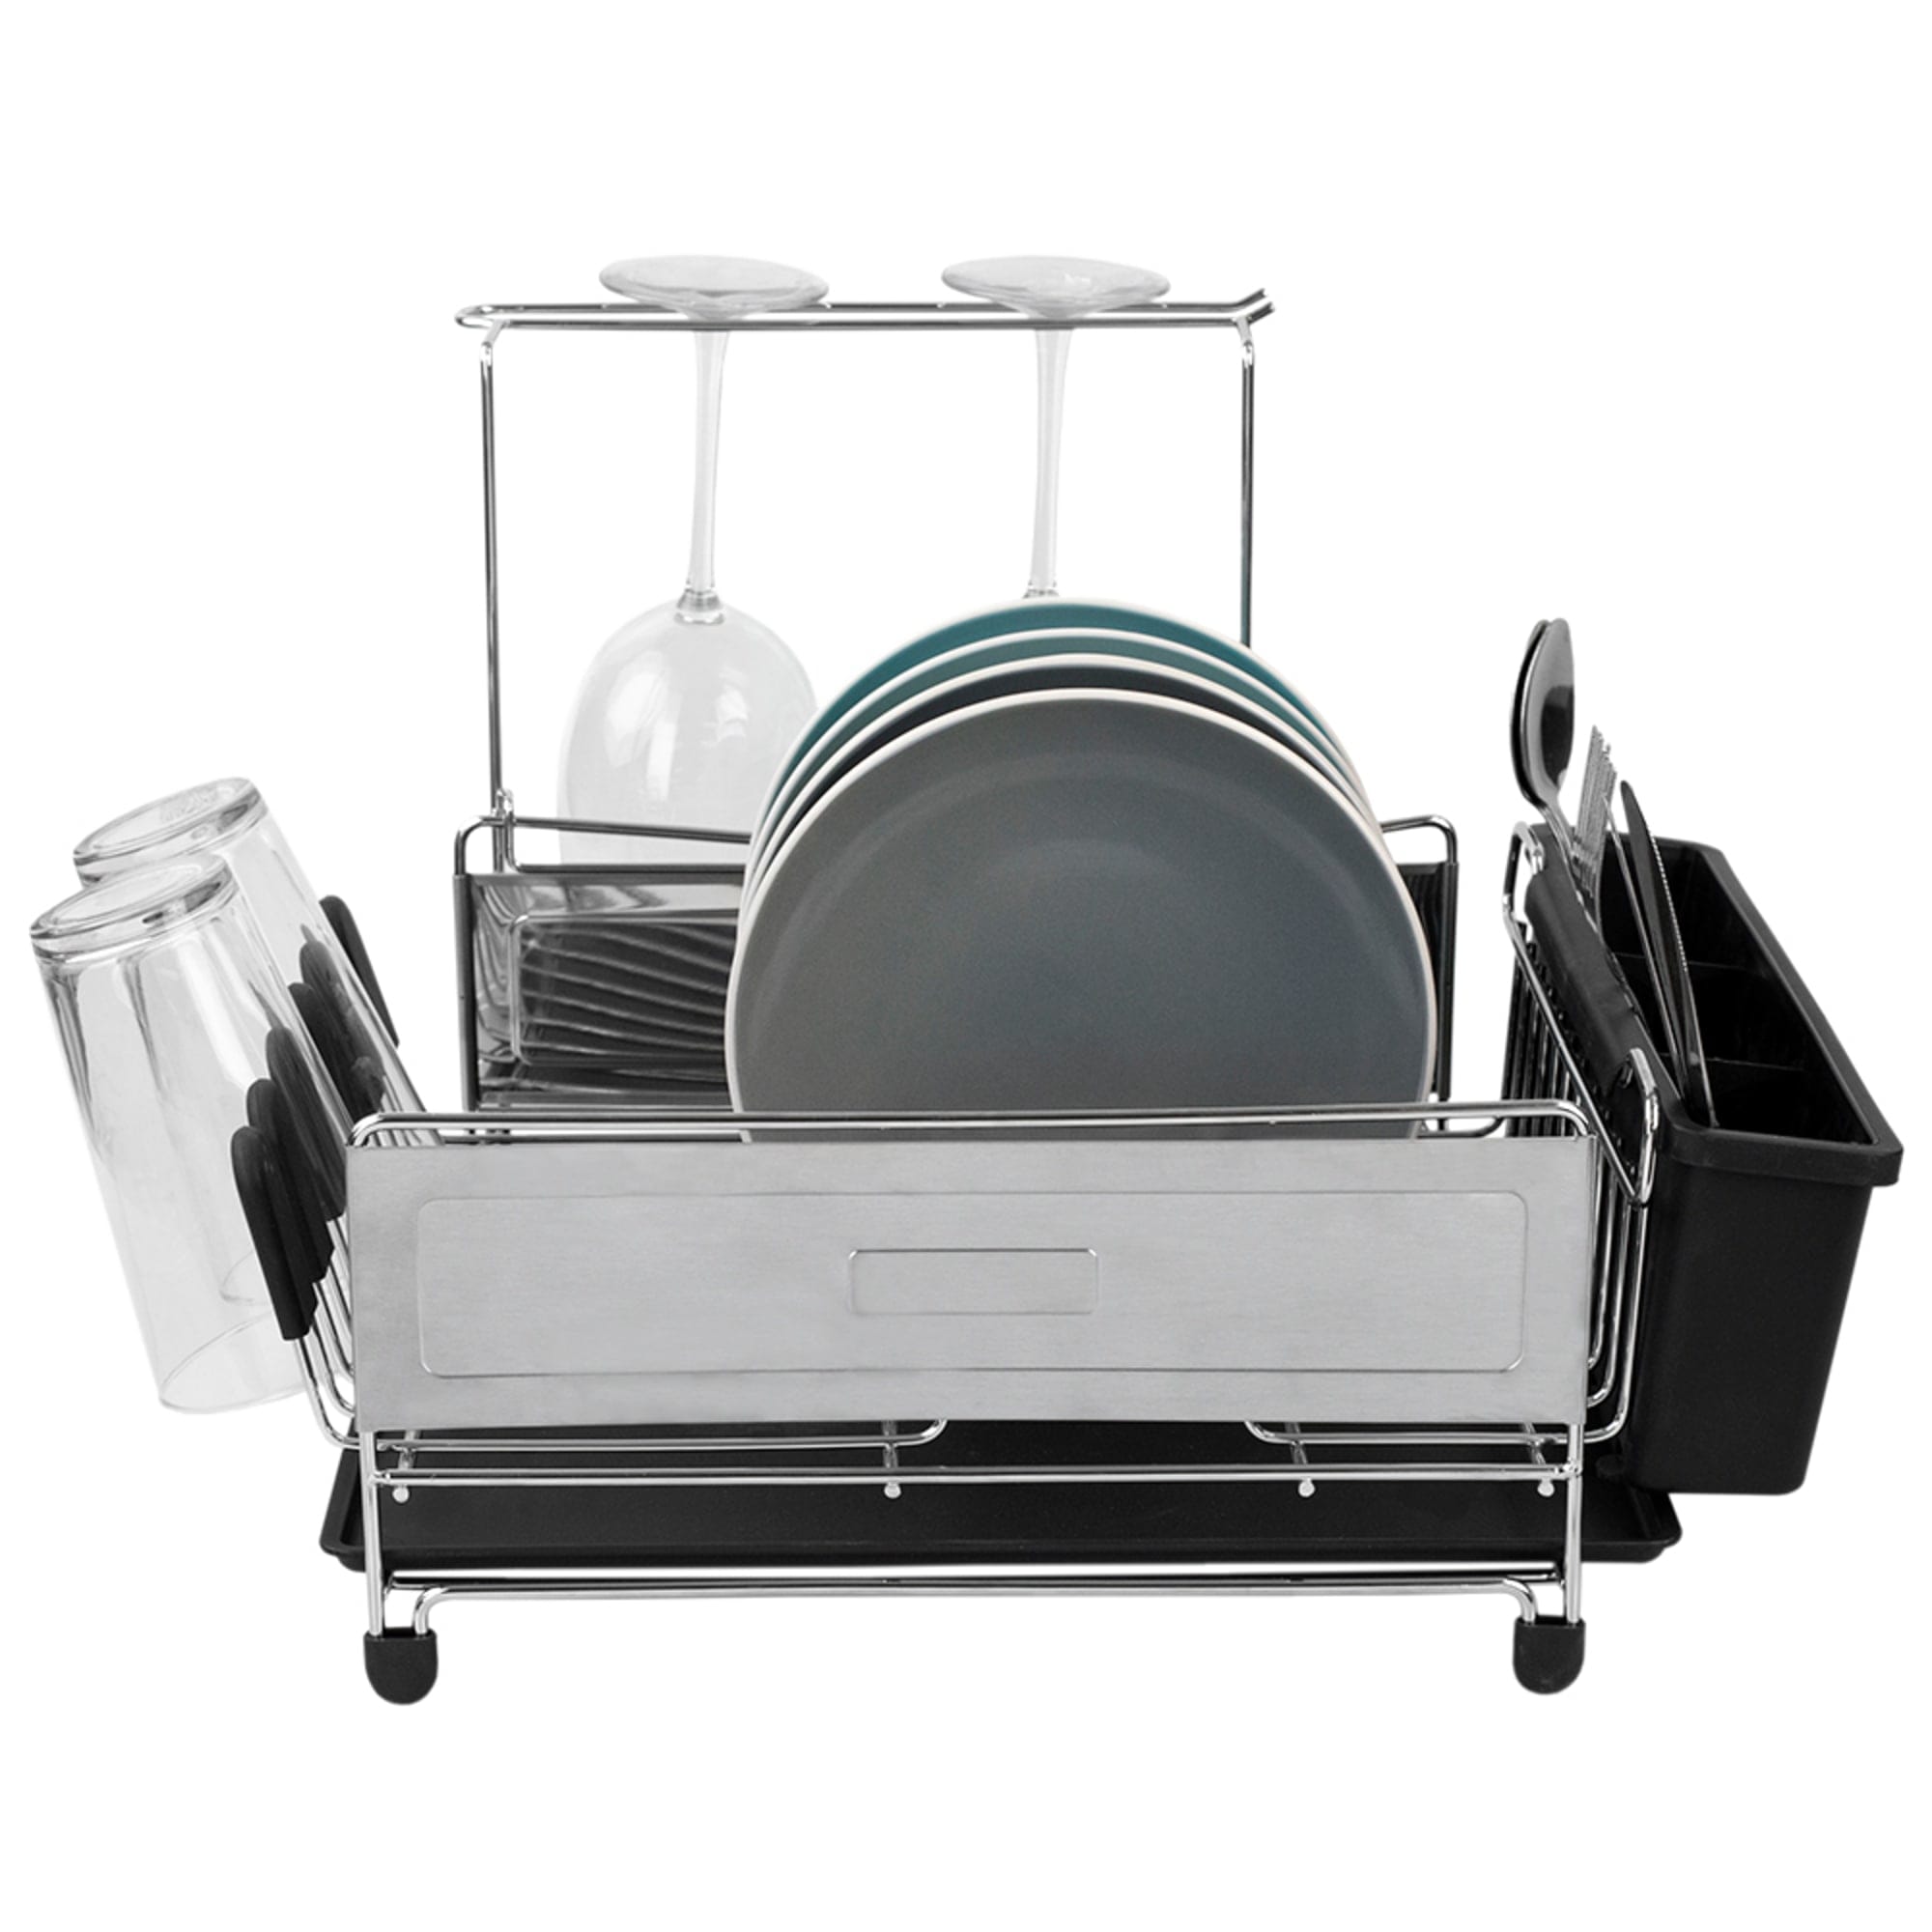 Michael Graves Design Deluxe Extra Large Capacity Stainless Steel Dish Rack with Wine Glass Holder, Black $30.00 EACH, CASE PACK OF 4